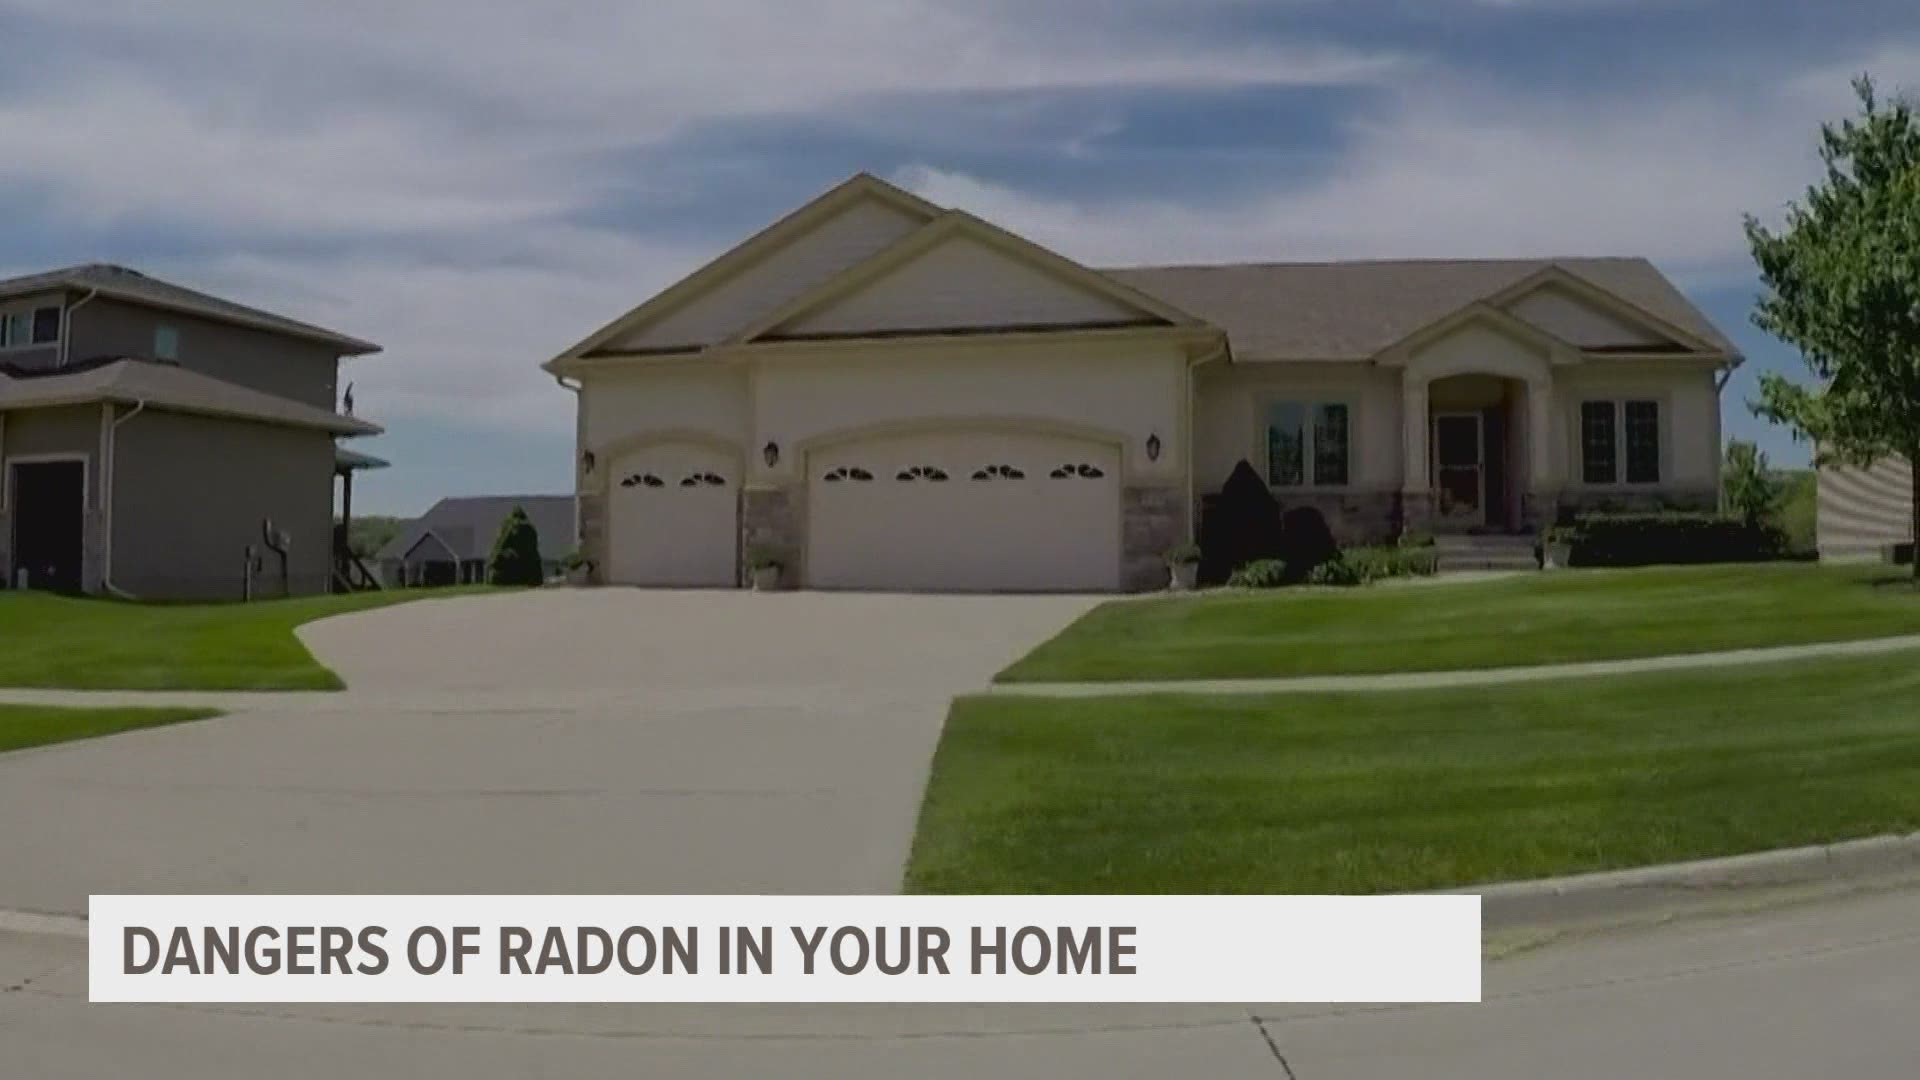 Experts recommend testing for radon every two years or after renovating.